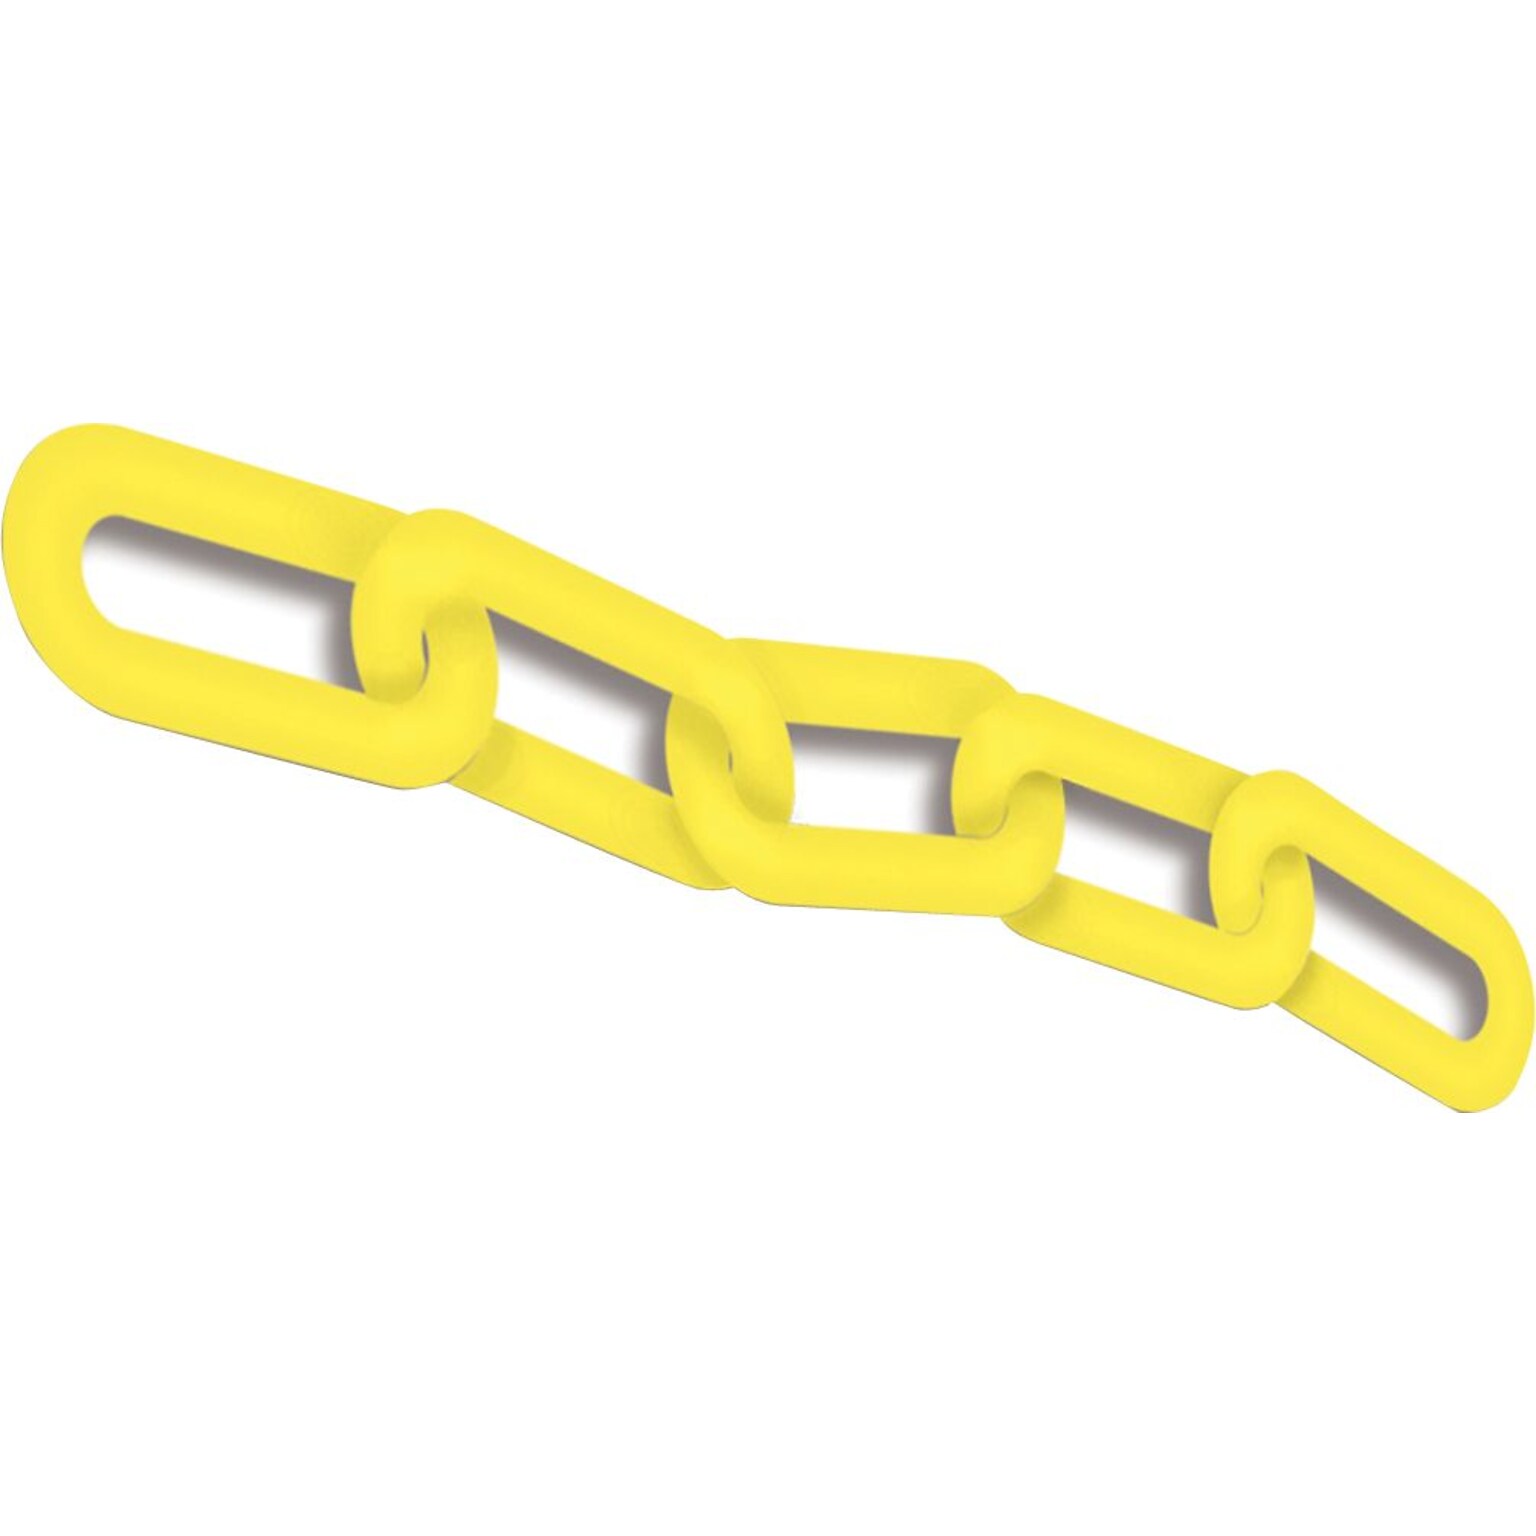 Accuform Plastic Chain for Use with BLOCKADE Stanchion Posts, 100, Yellow (PRC211YL)